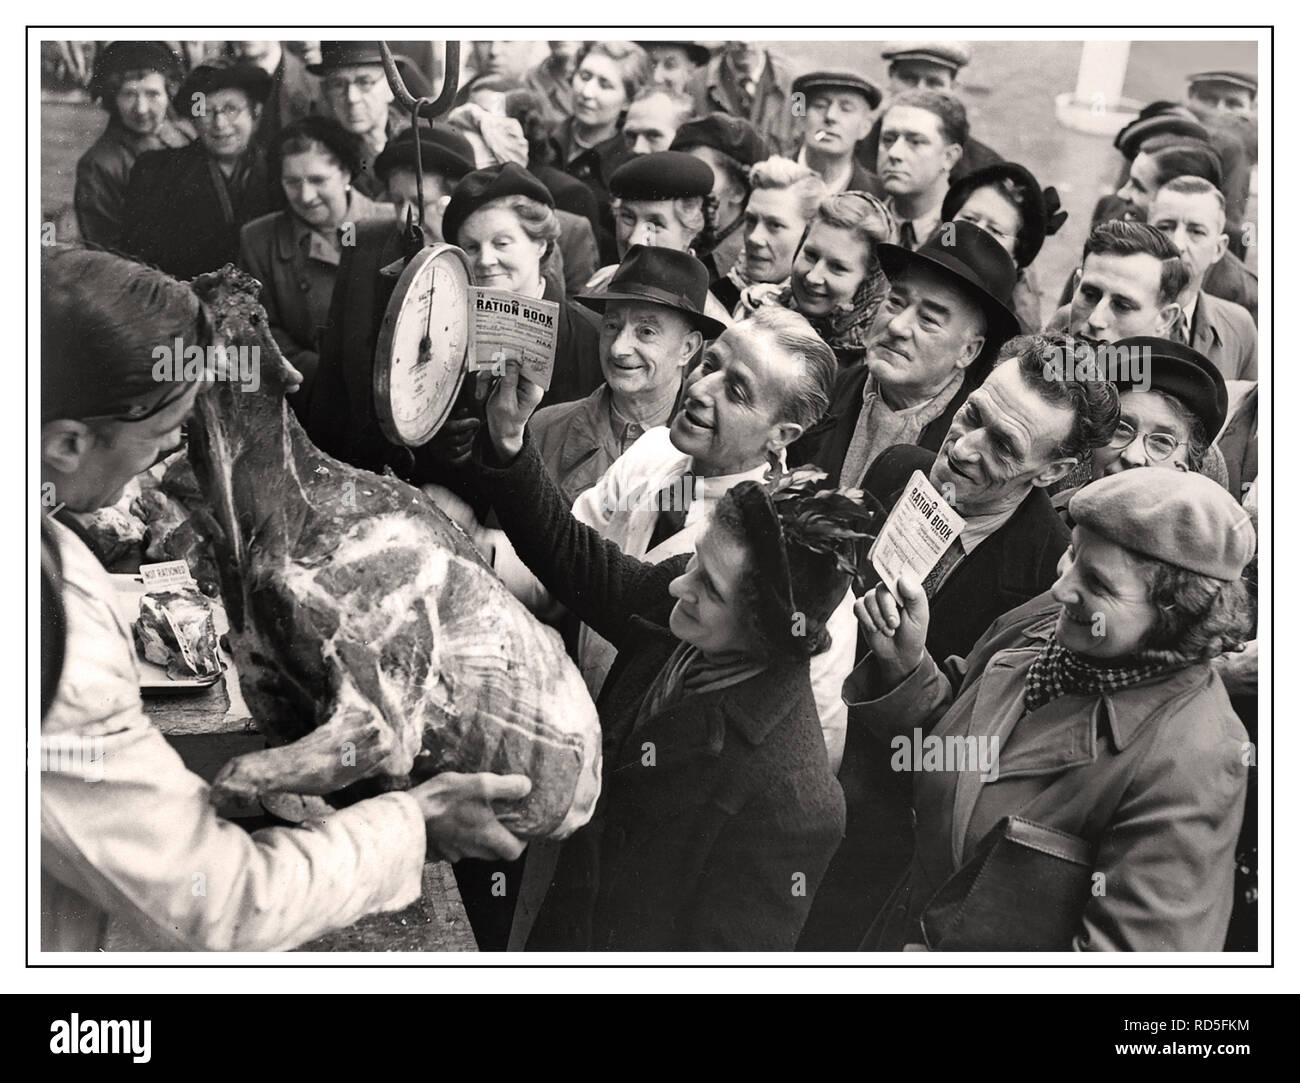 MEAT RATIONING Post-War 1946 WW2 British propaganda image of happy food-shopping crowd with government food ration books keen to purchase un-rationed Reindeer Meat from Smithfield Market Butcher London UK Stock Photo